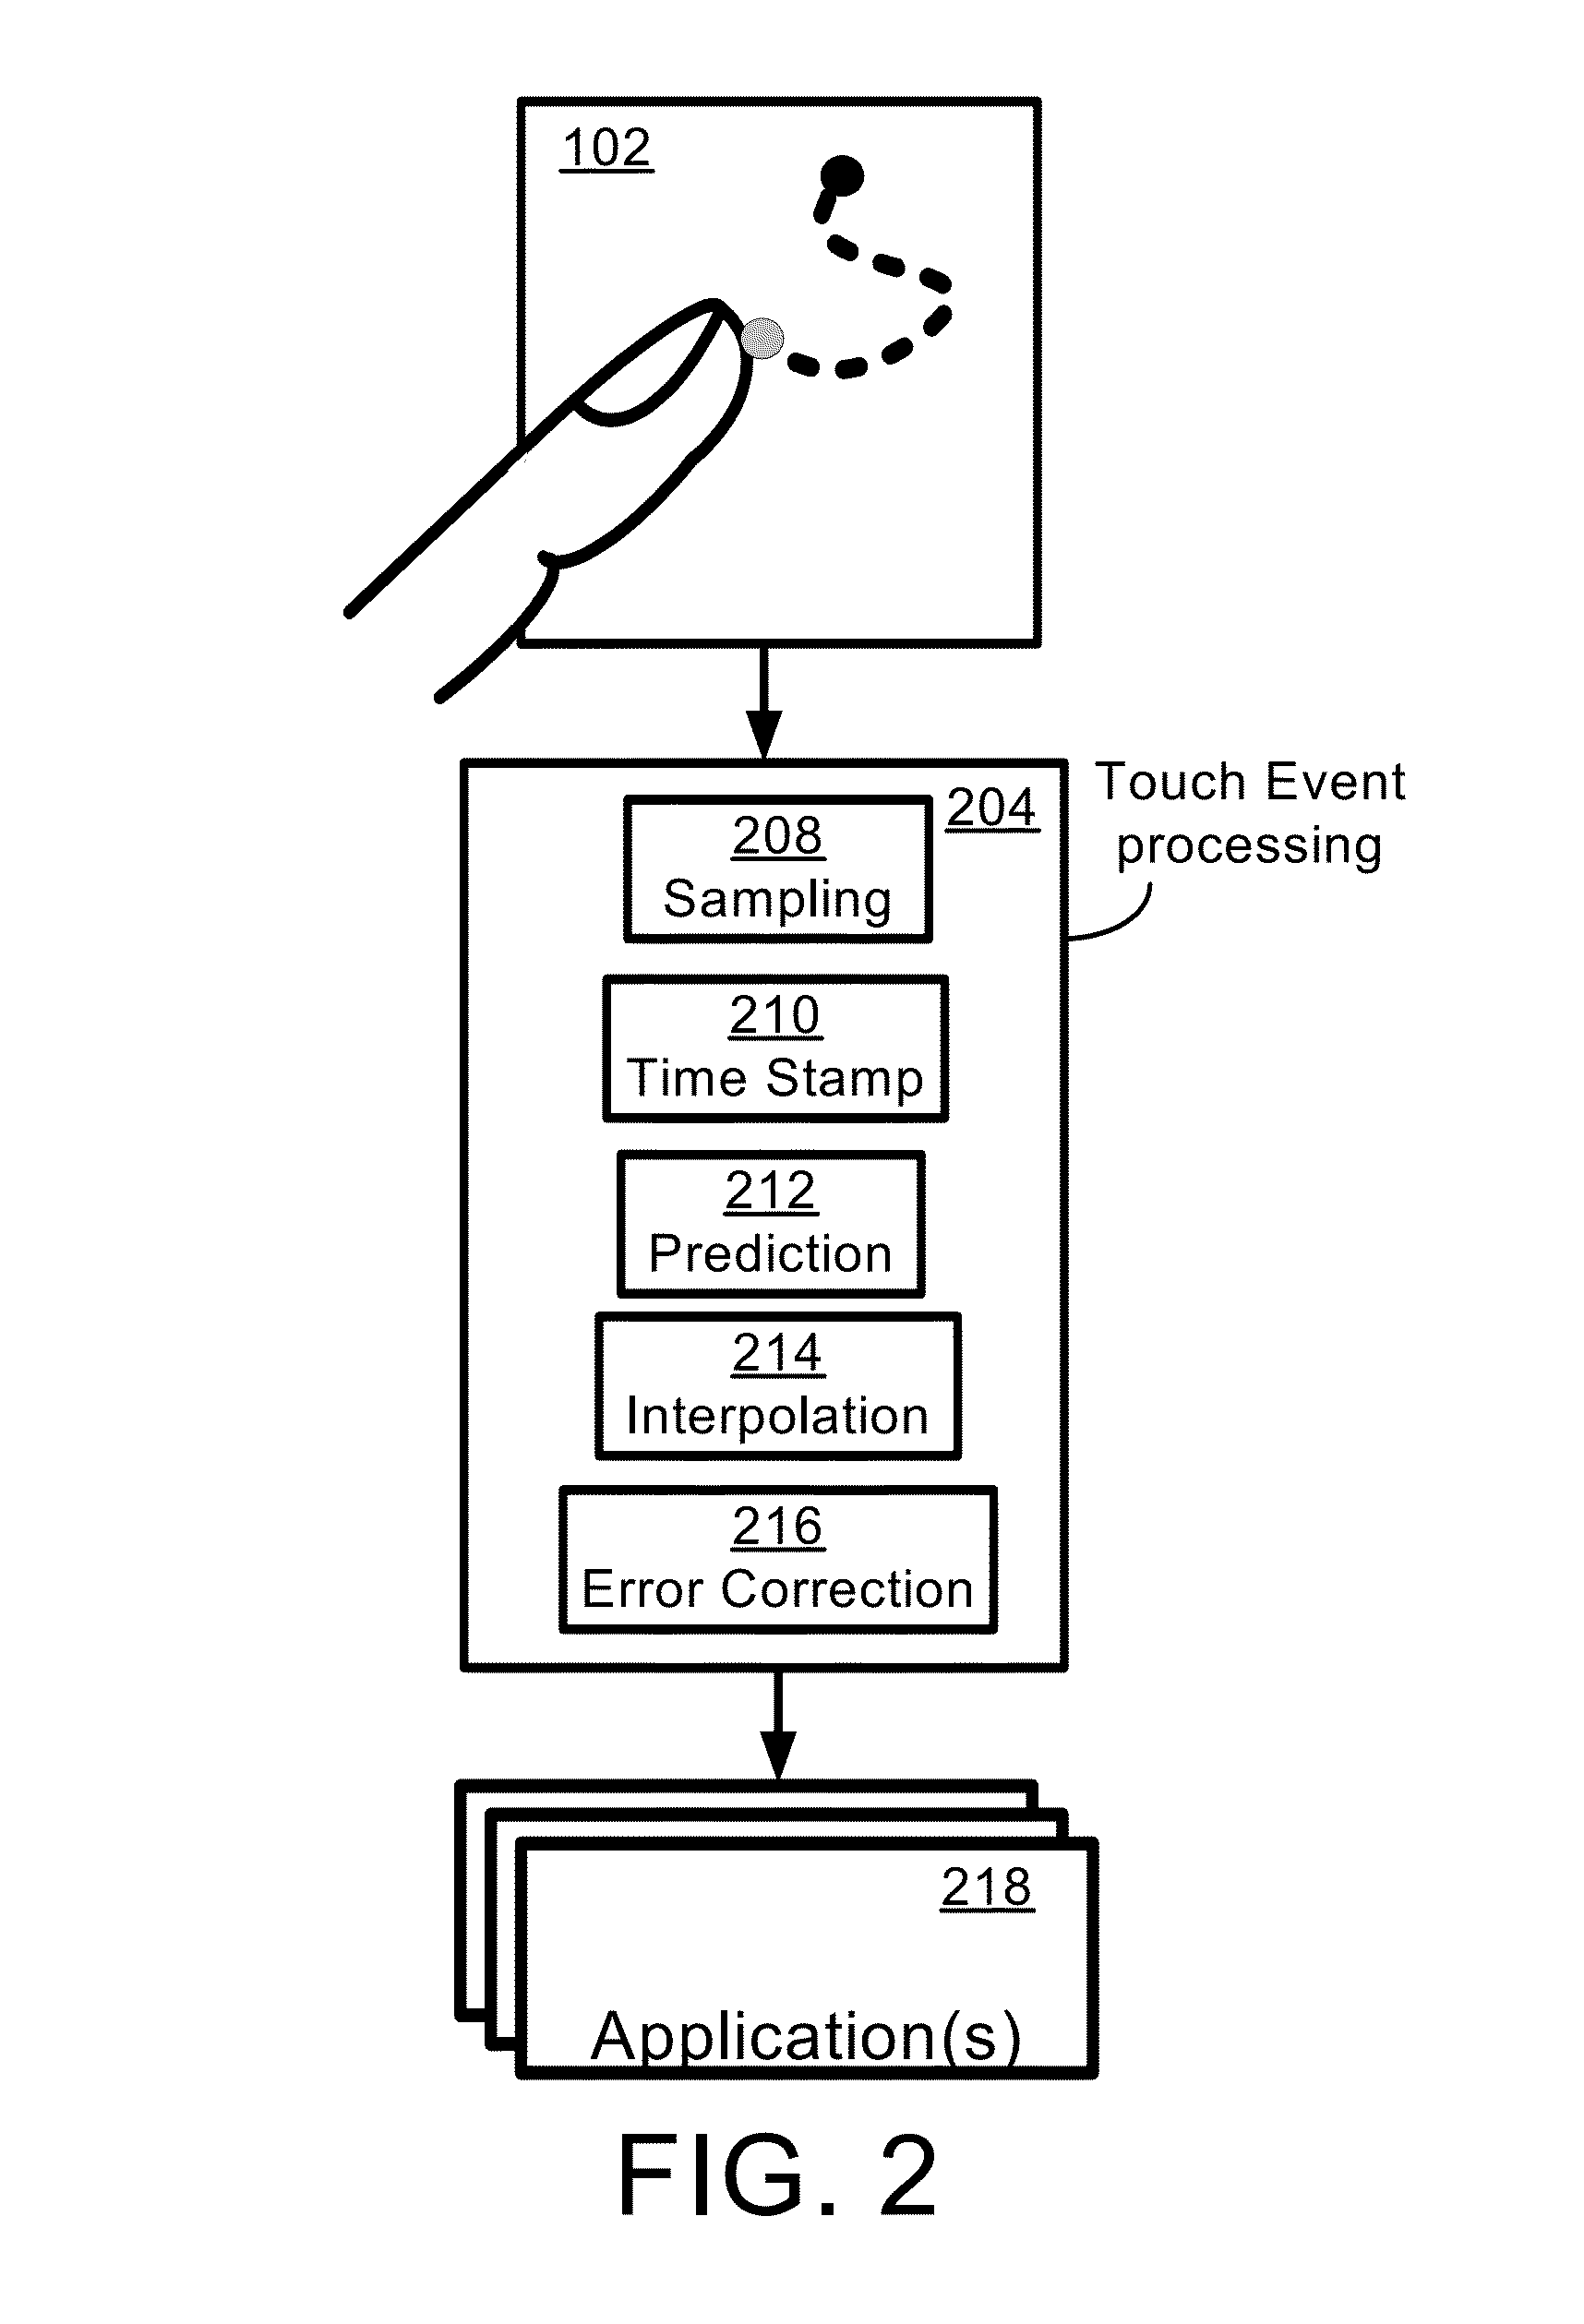 Systems and methods for improving image tracking based on touch events